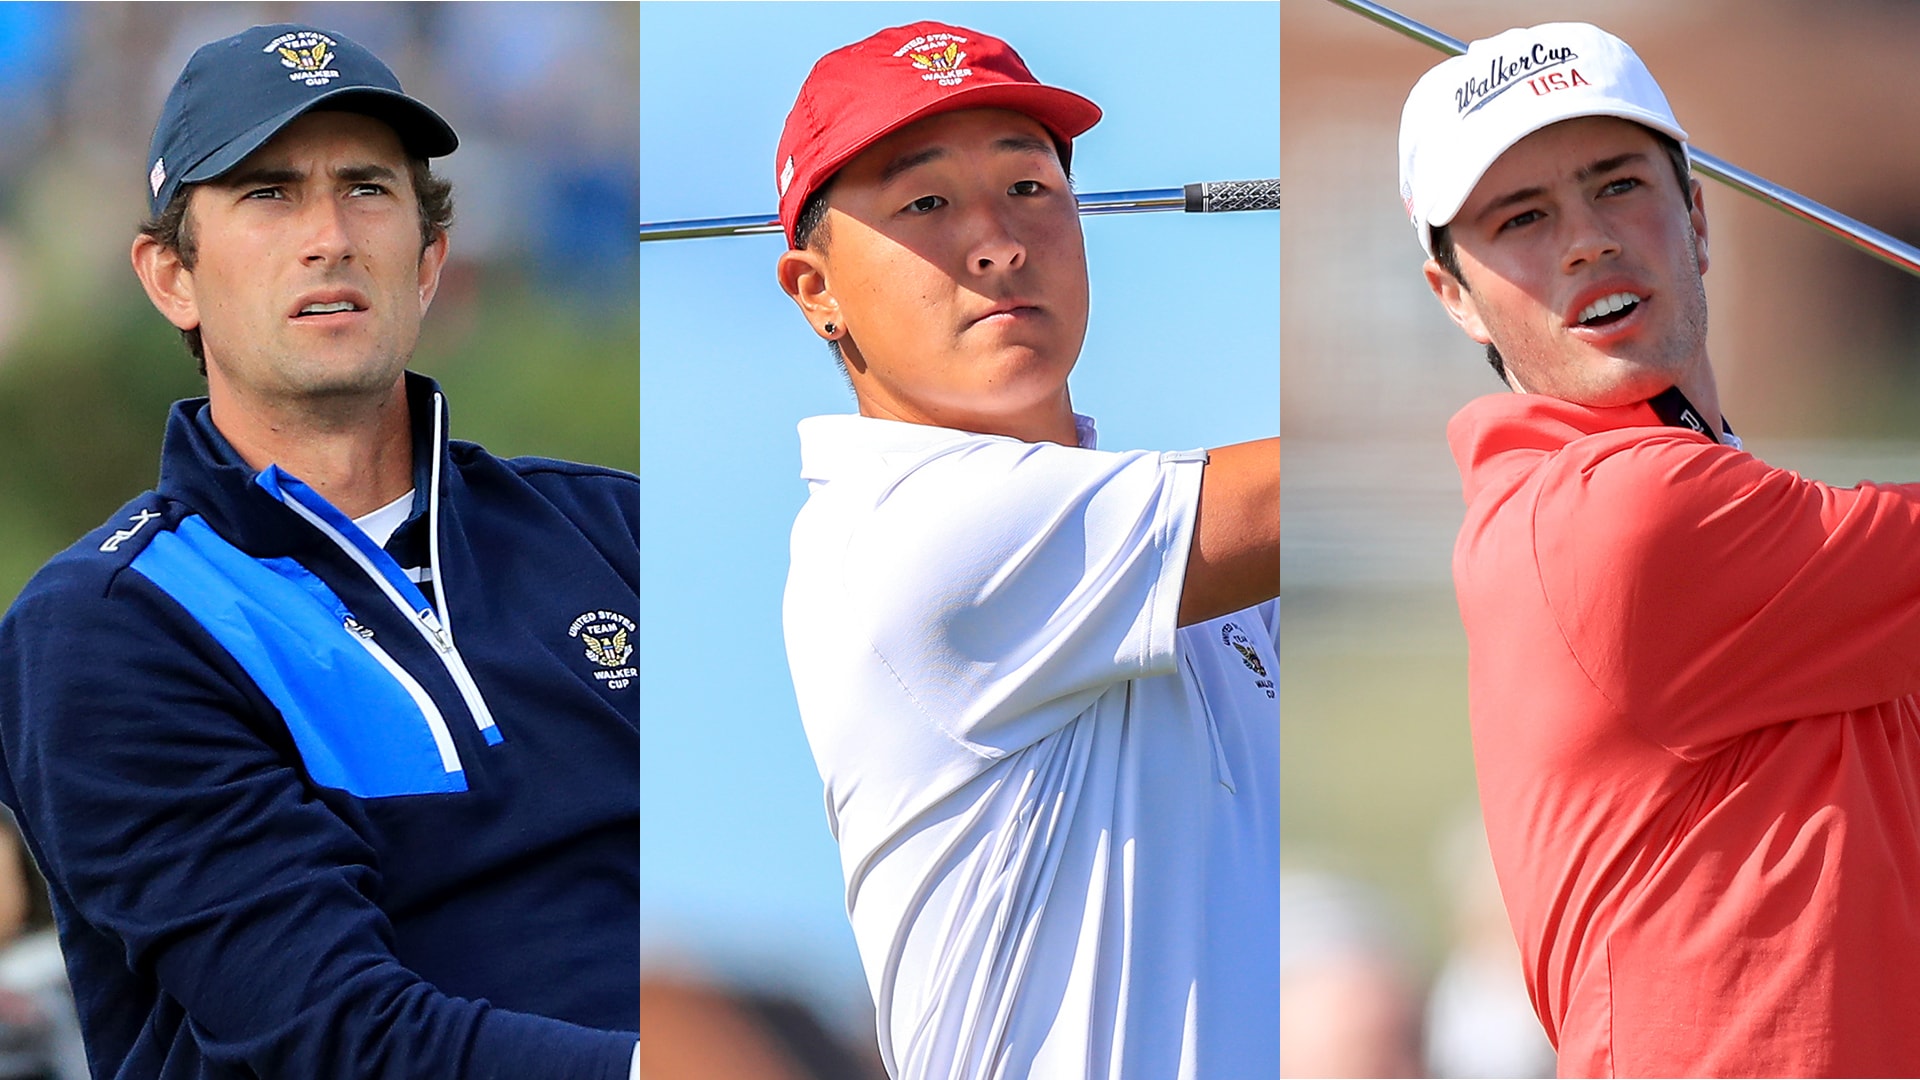 USGA announces the 10-man U.S. Walker Cup team that will compete at Seminole